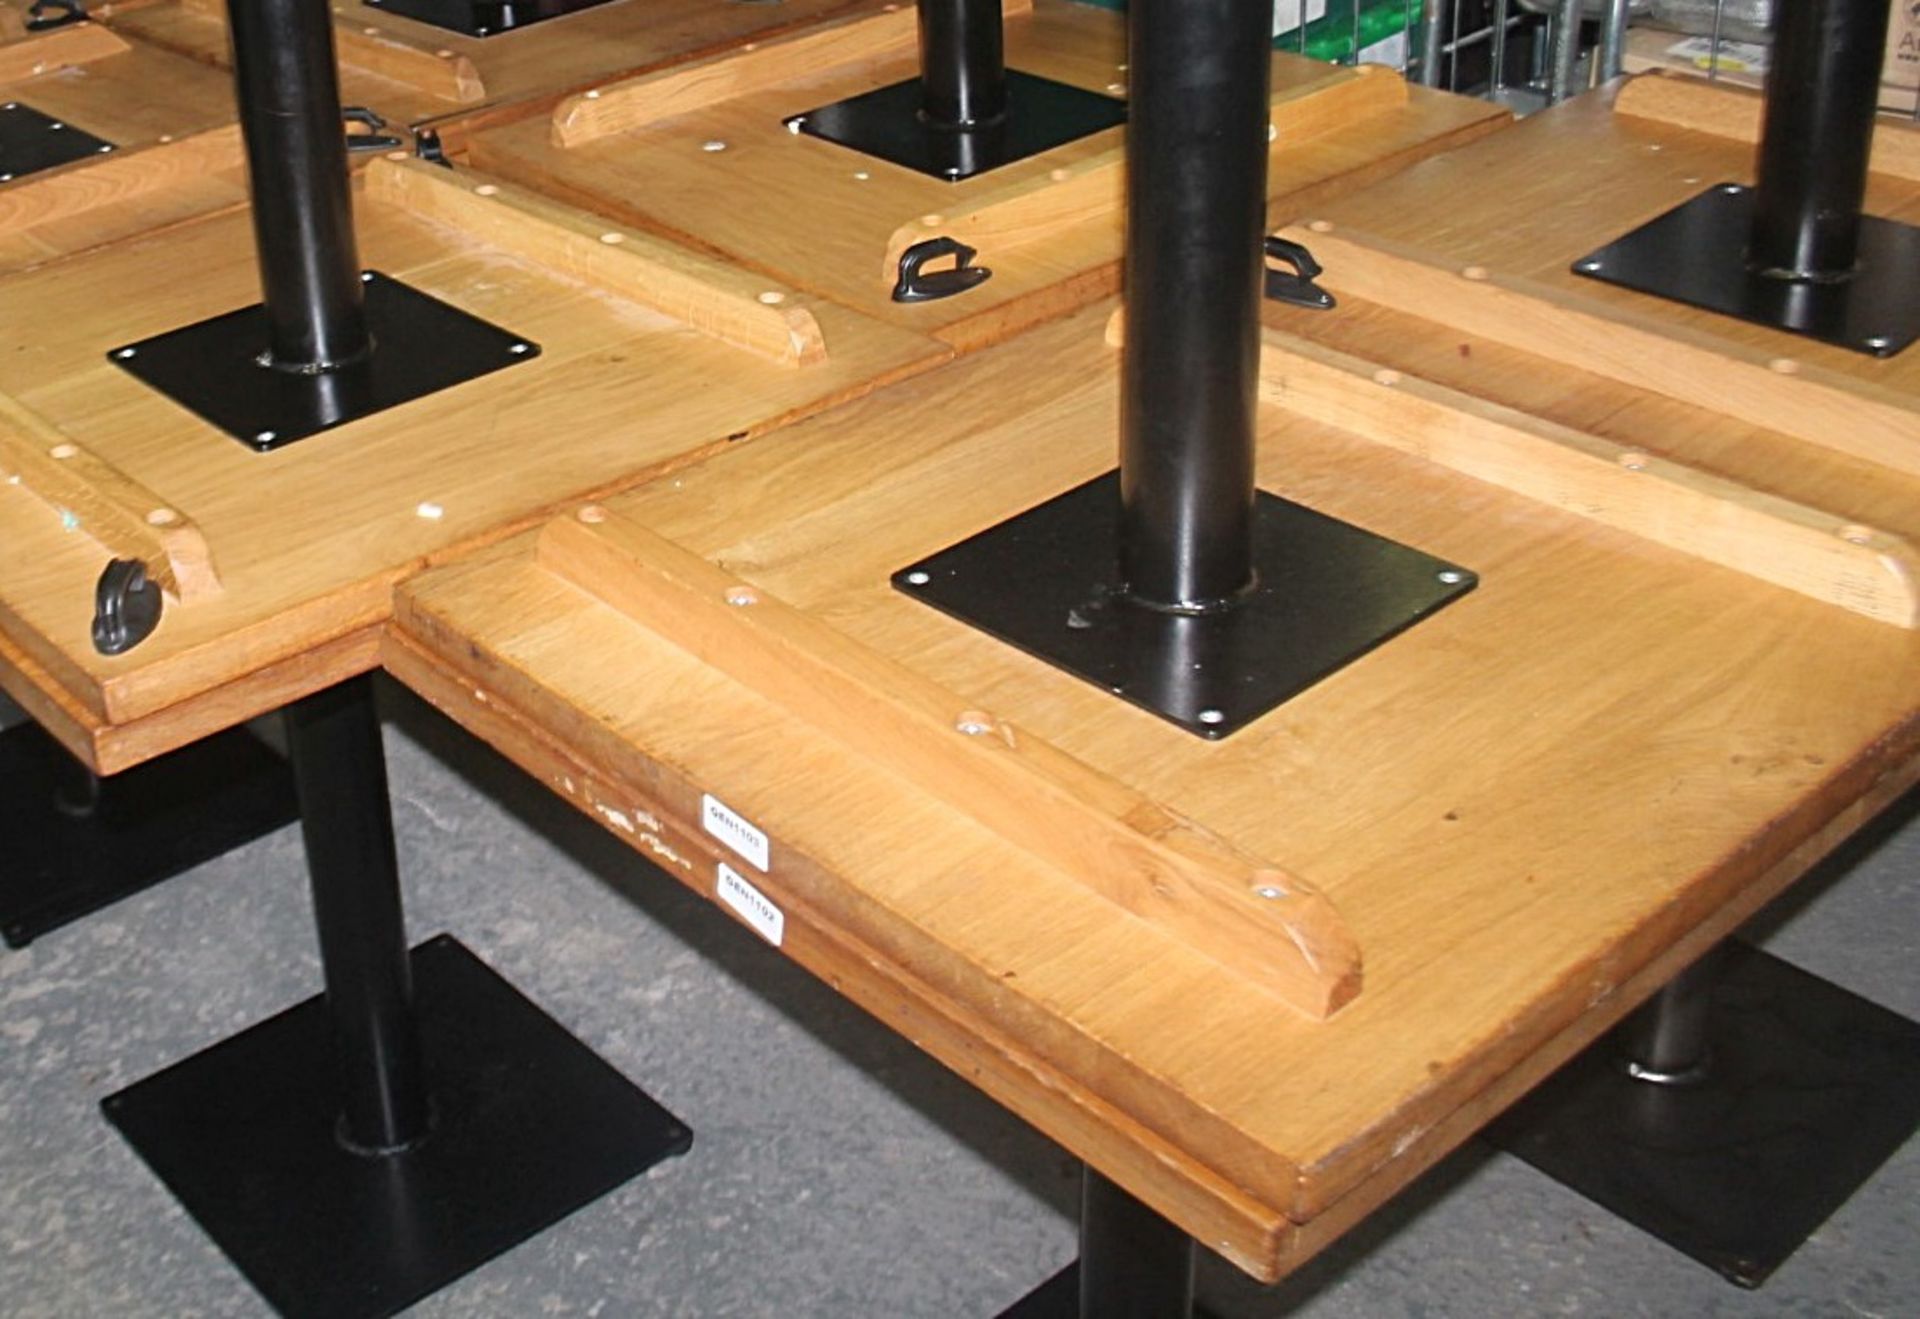 4 x Solid Oak Restaurant Dining Tables - Natural Rustic Knotty Oak Tops With Black Cast Iron Bases - - Image 6 of 7